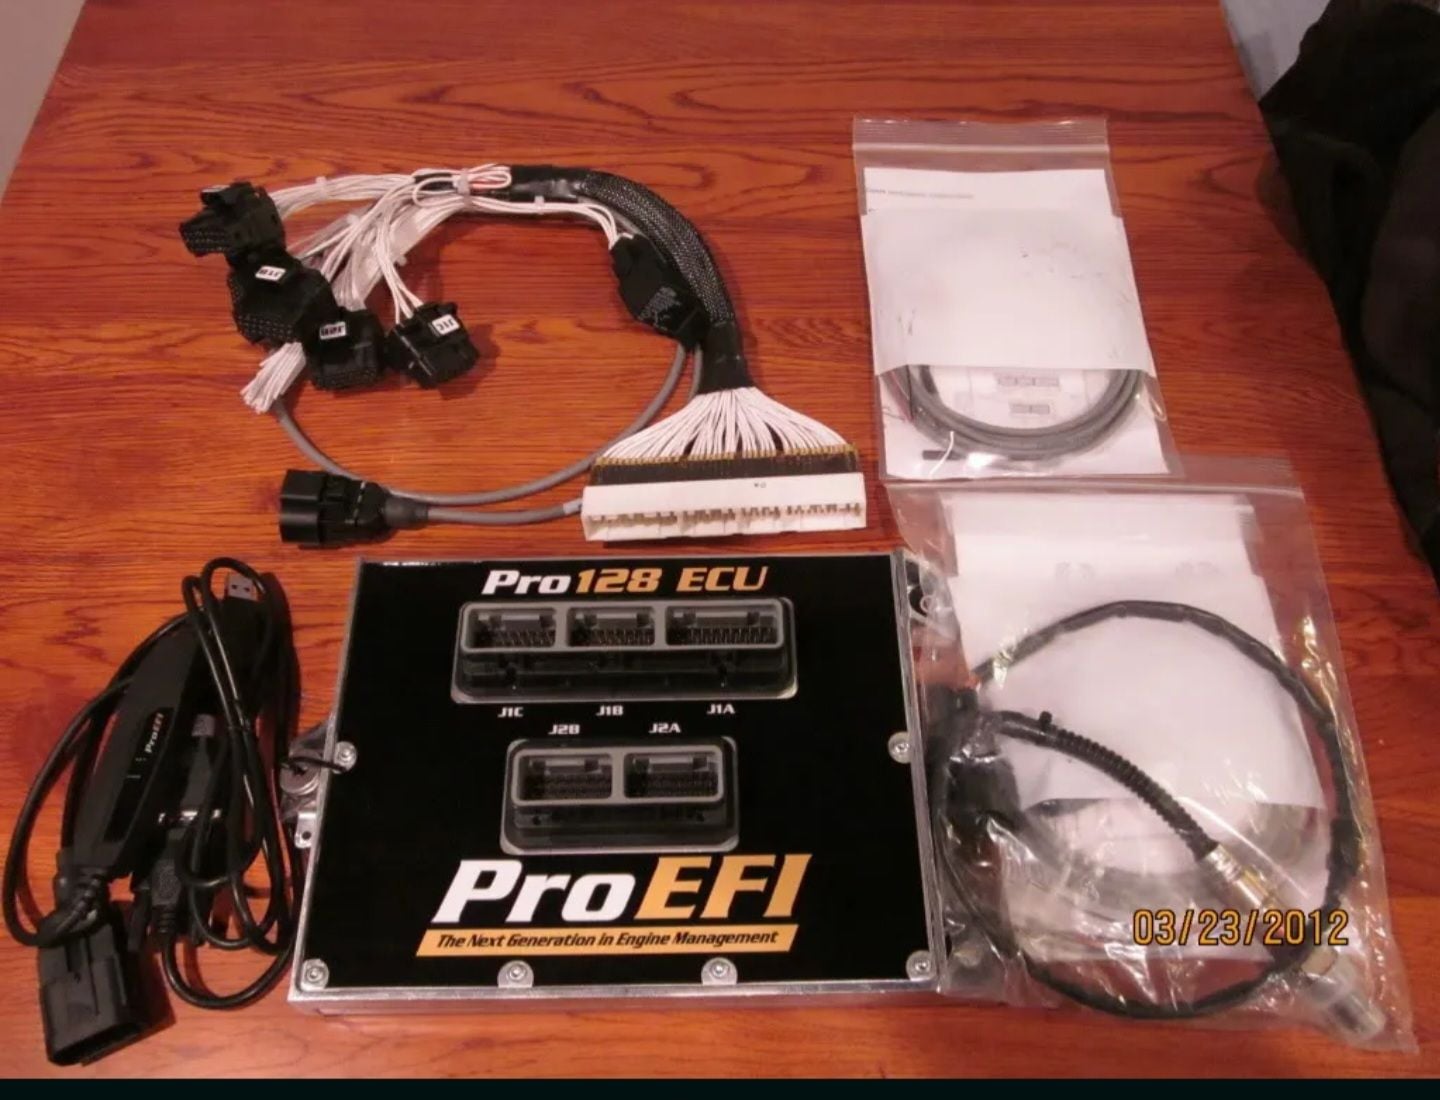 Engine - Electrical - New Pro Efi ECU with FD plug and play harness $2500 OBO - New - 1993 to 2002 Mazda RX-7 - Greenville, SC 29601, United States